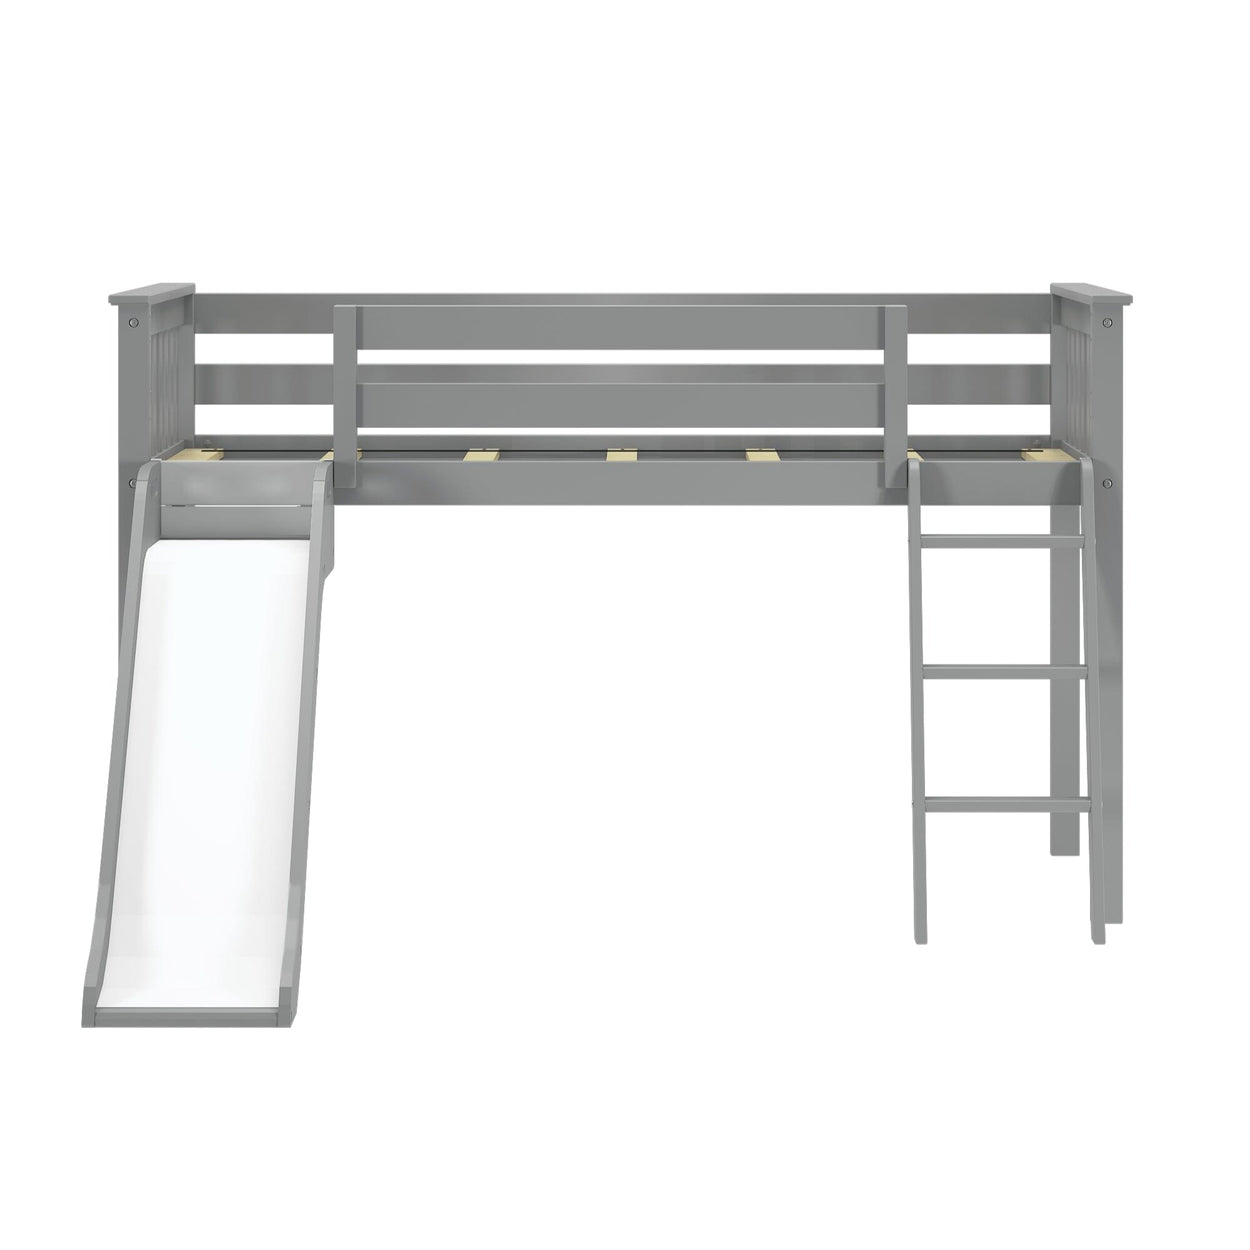 180413121069 : Loft Beds Low Loft with Easy Slide and Black and White Farmhouse Curtain, Grey